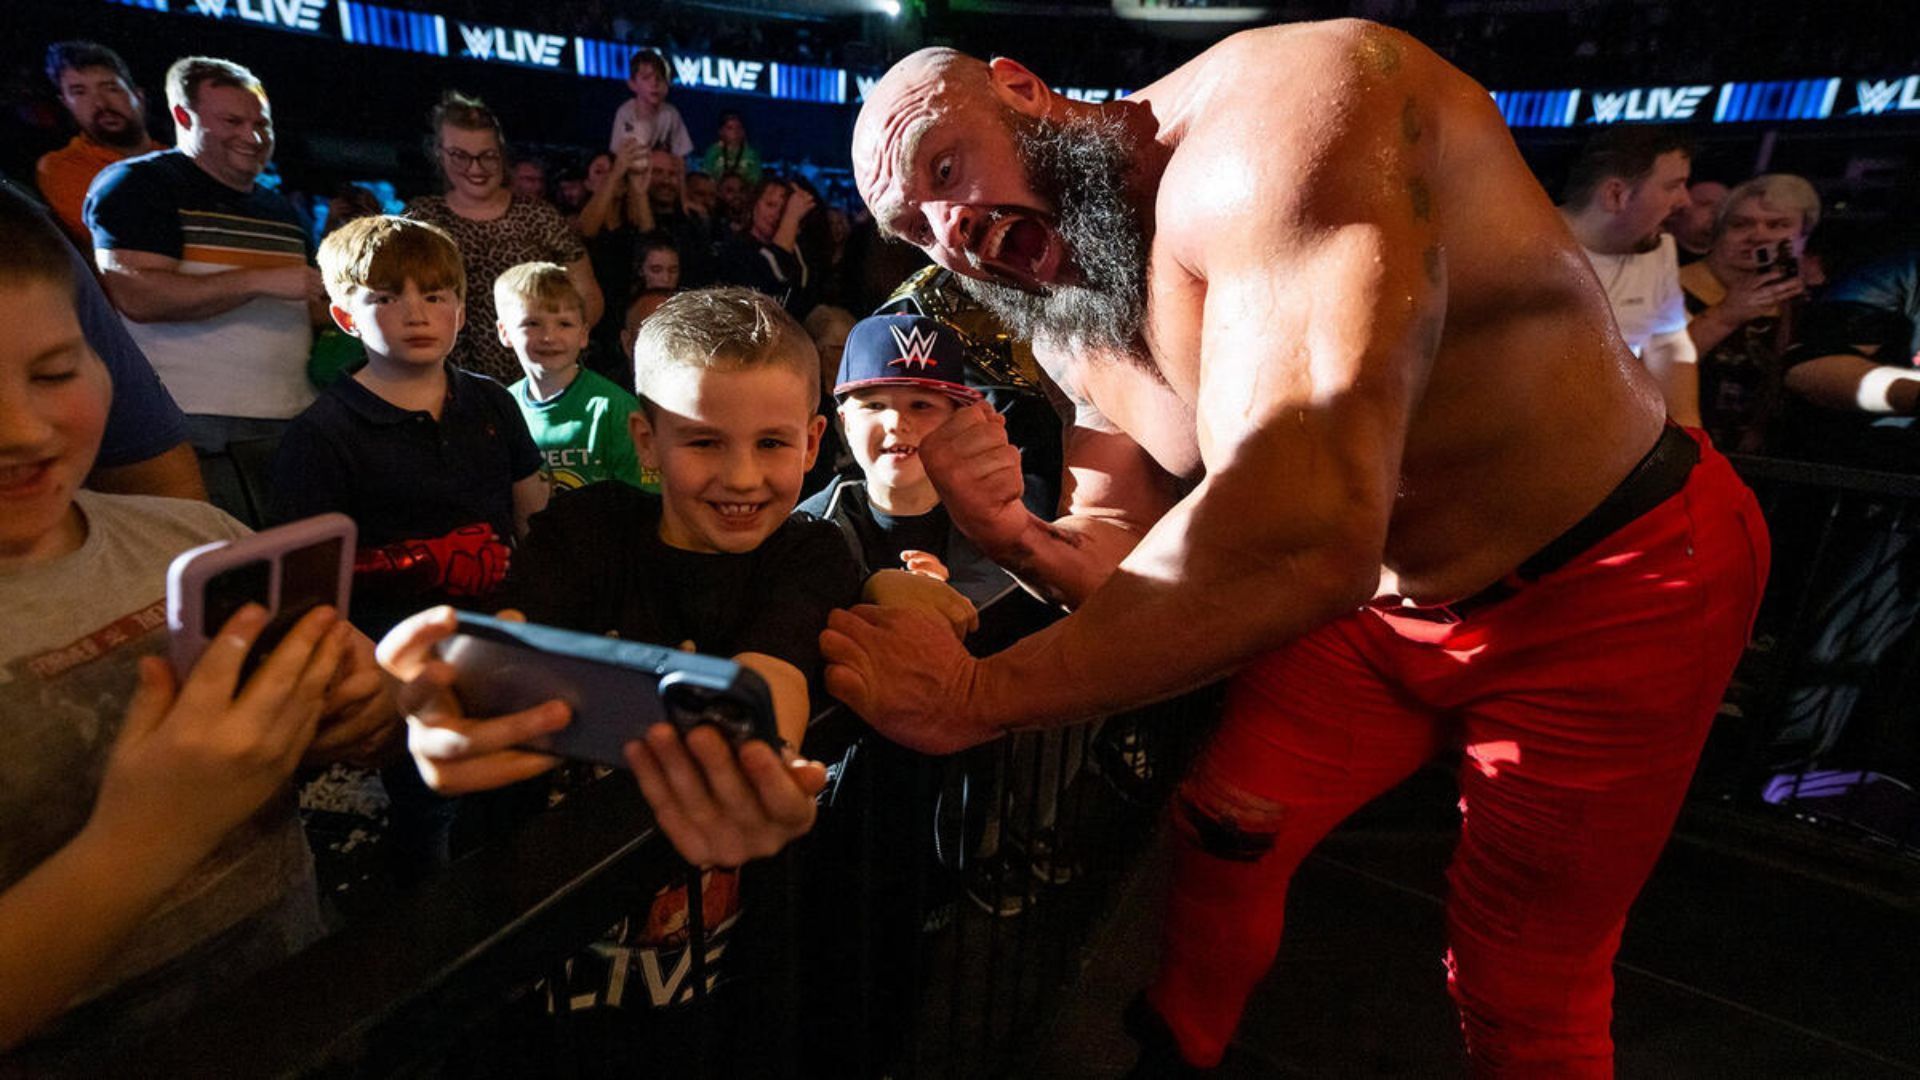 Braun Strowman celebrating with young fans [Photo credit: WWE]